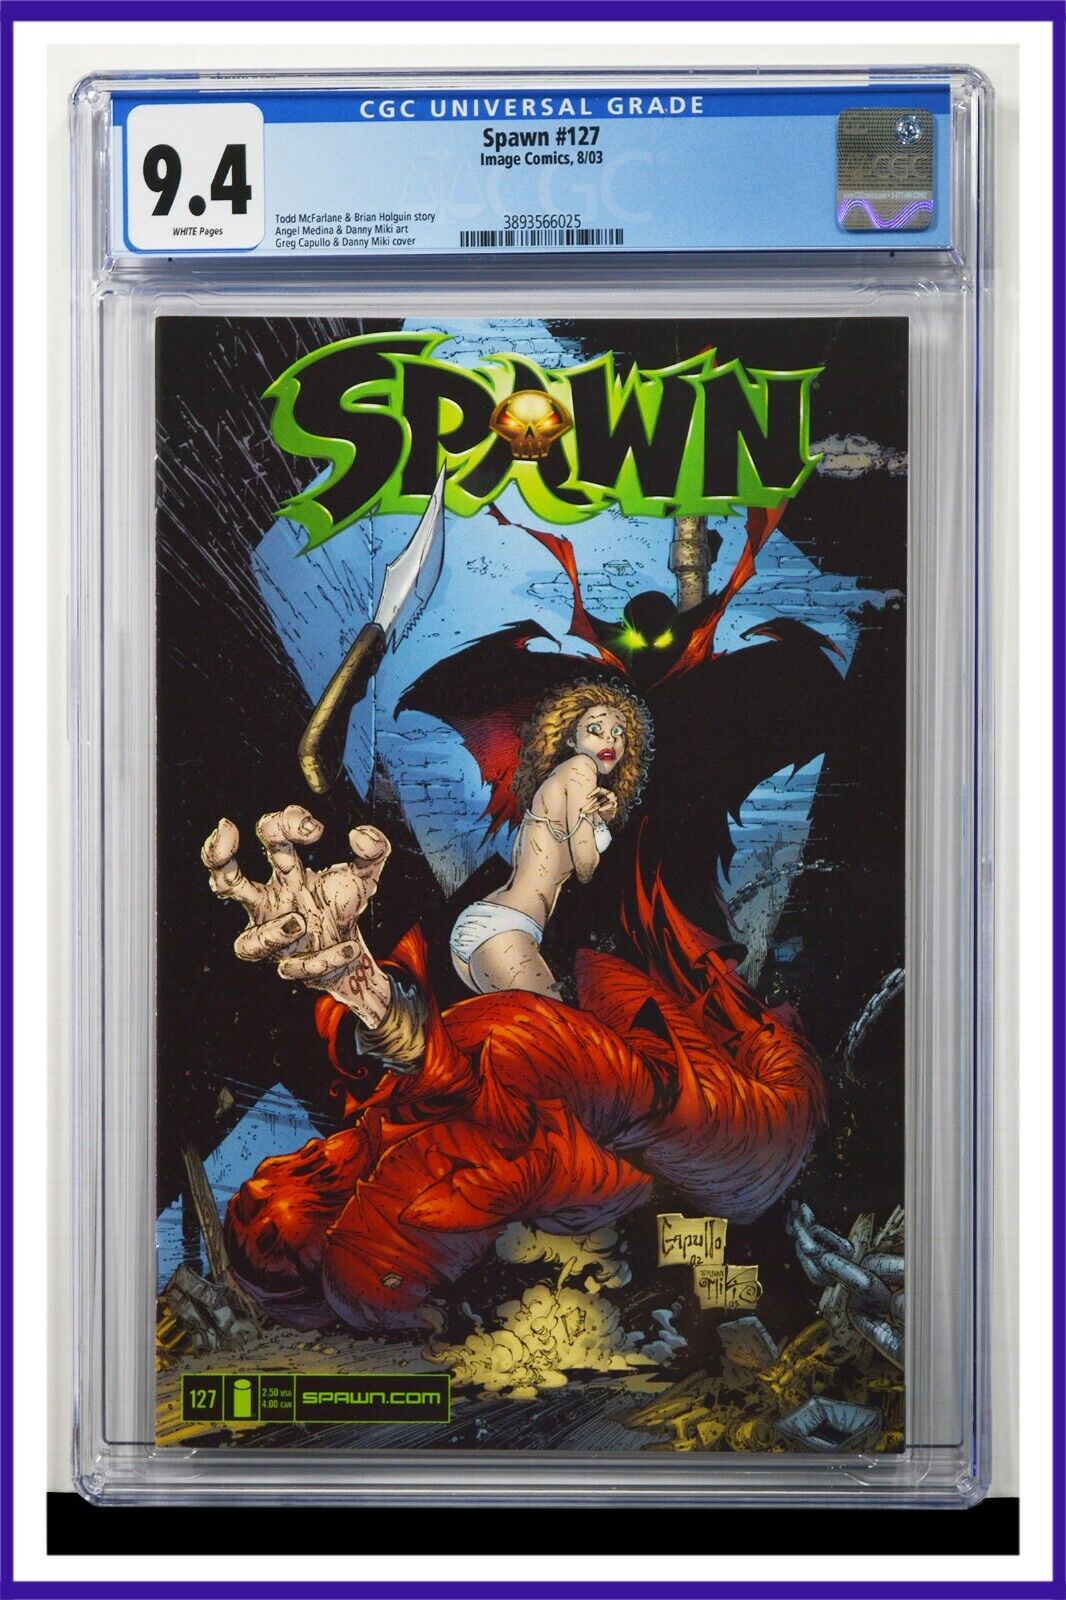 Spawn #127 CGC Graded 9.4 Image August 2003 White Pages Comic Book.